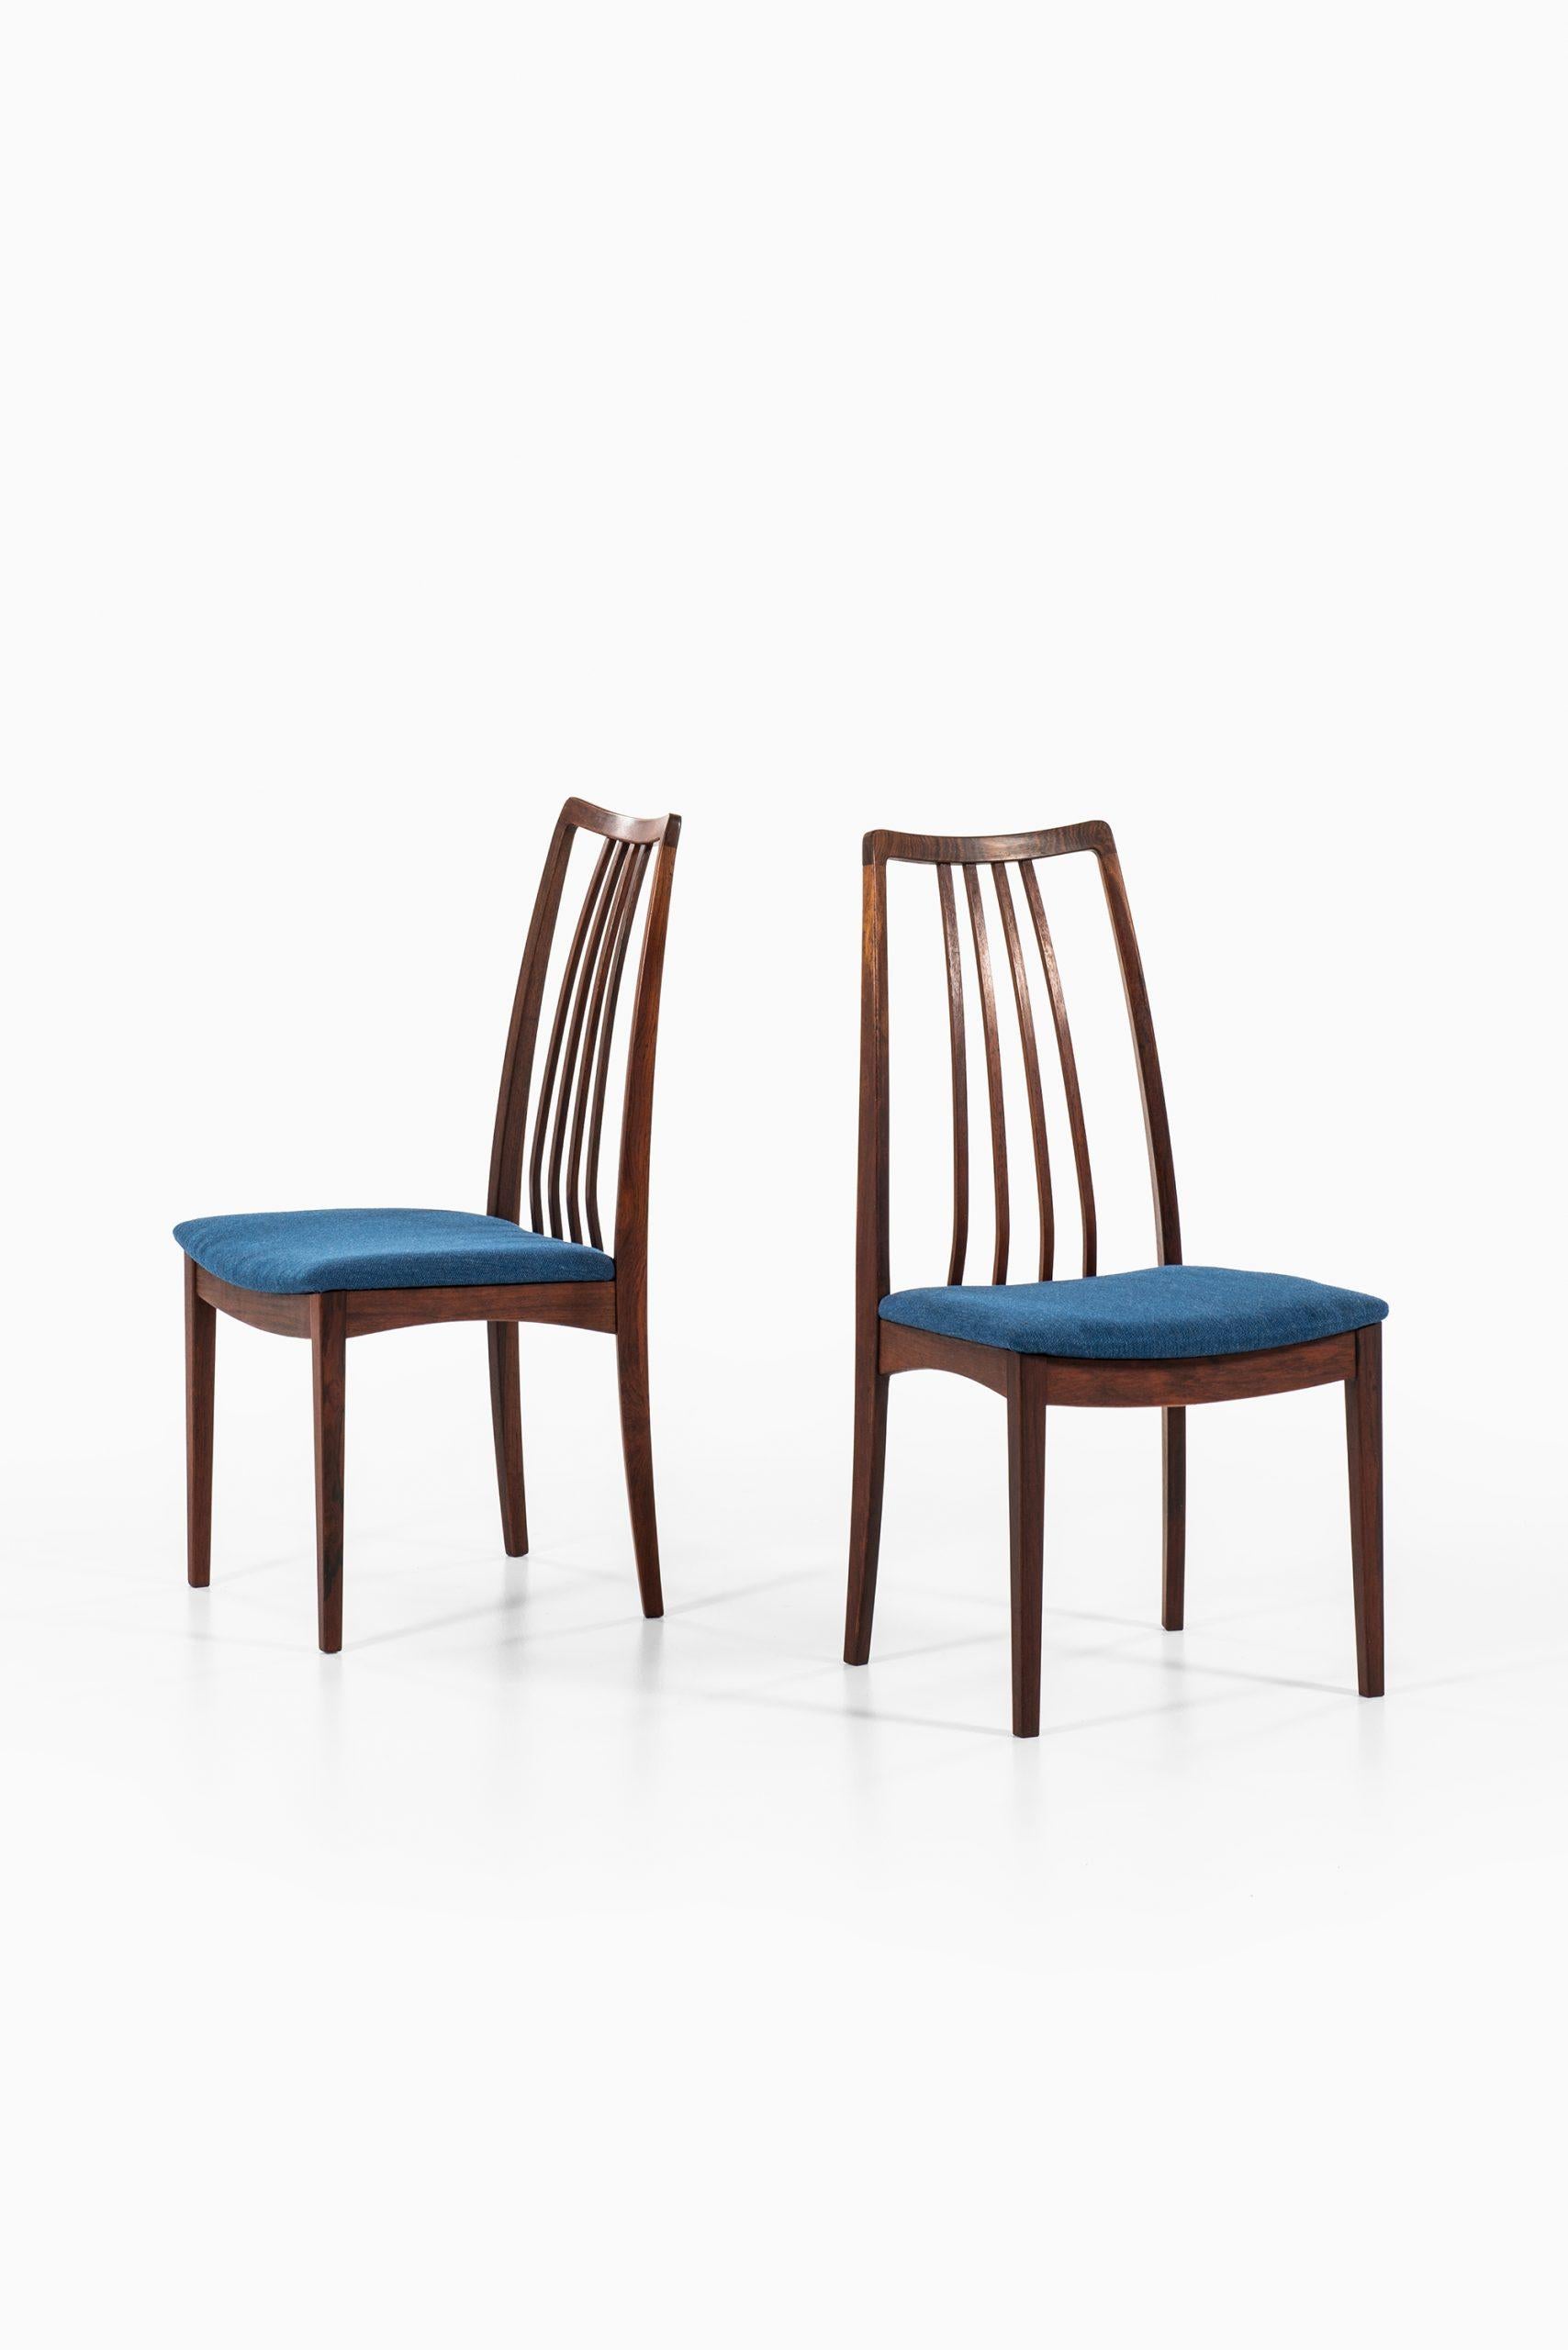 Rare set of 8 high-backed dining chairs attributed to Niels Kofoed. Produced in Denmark.